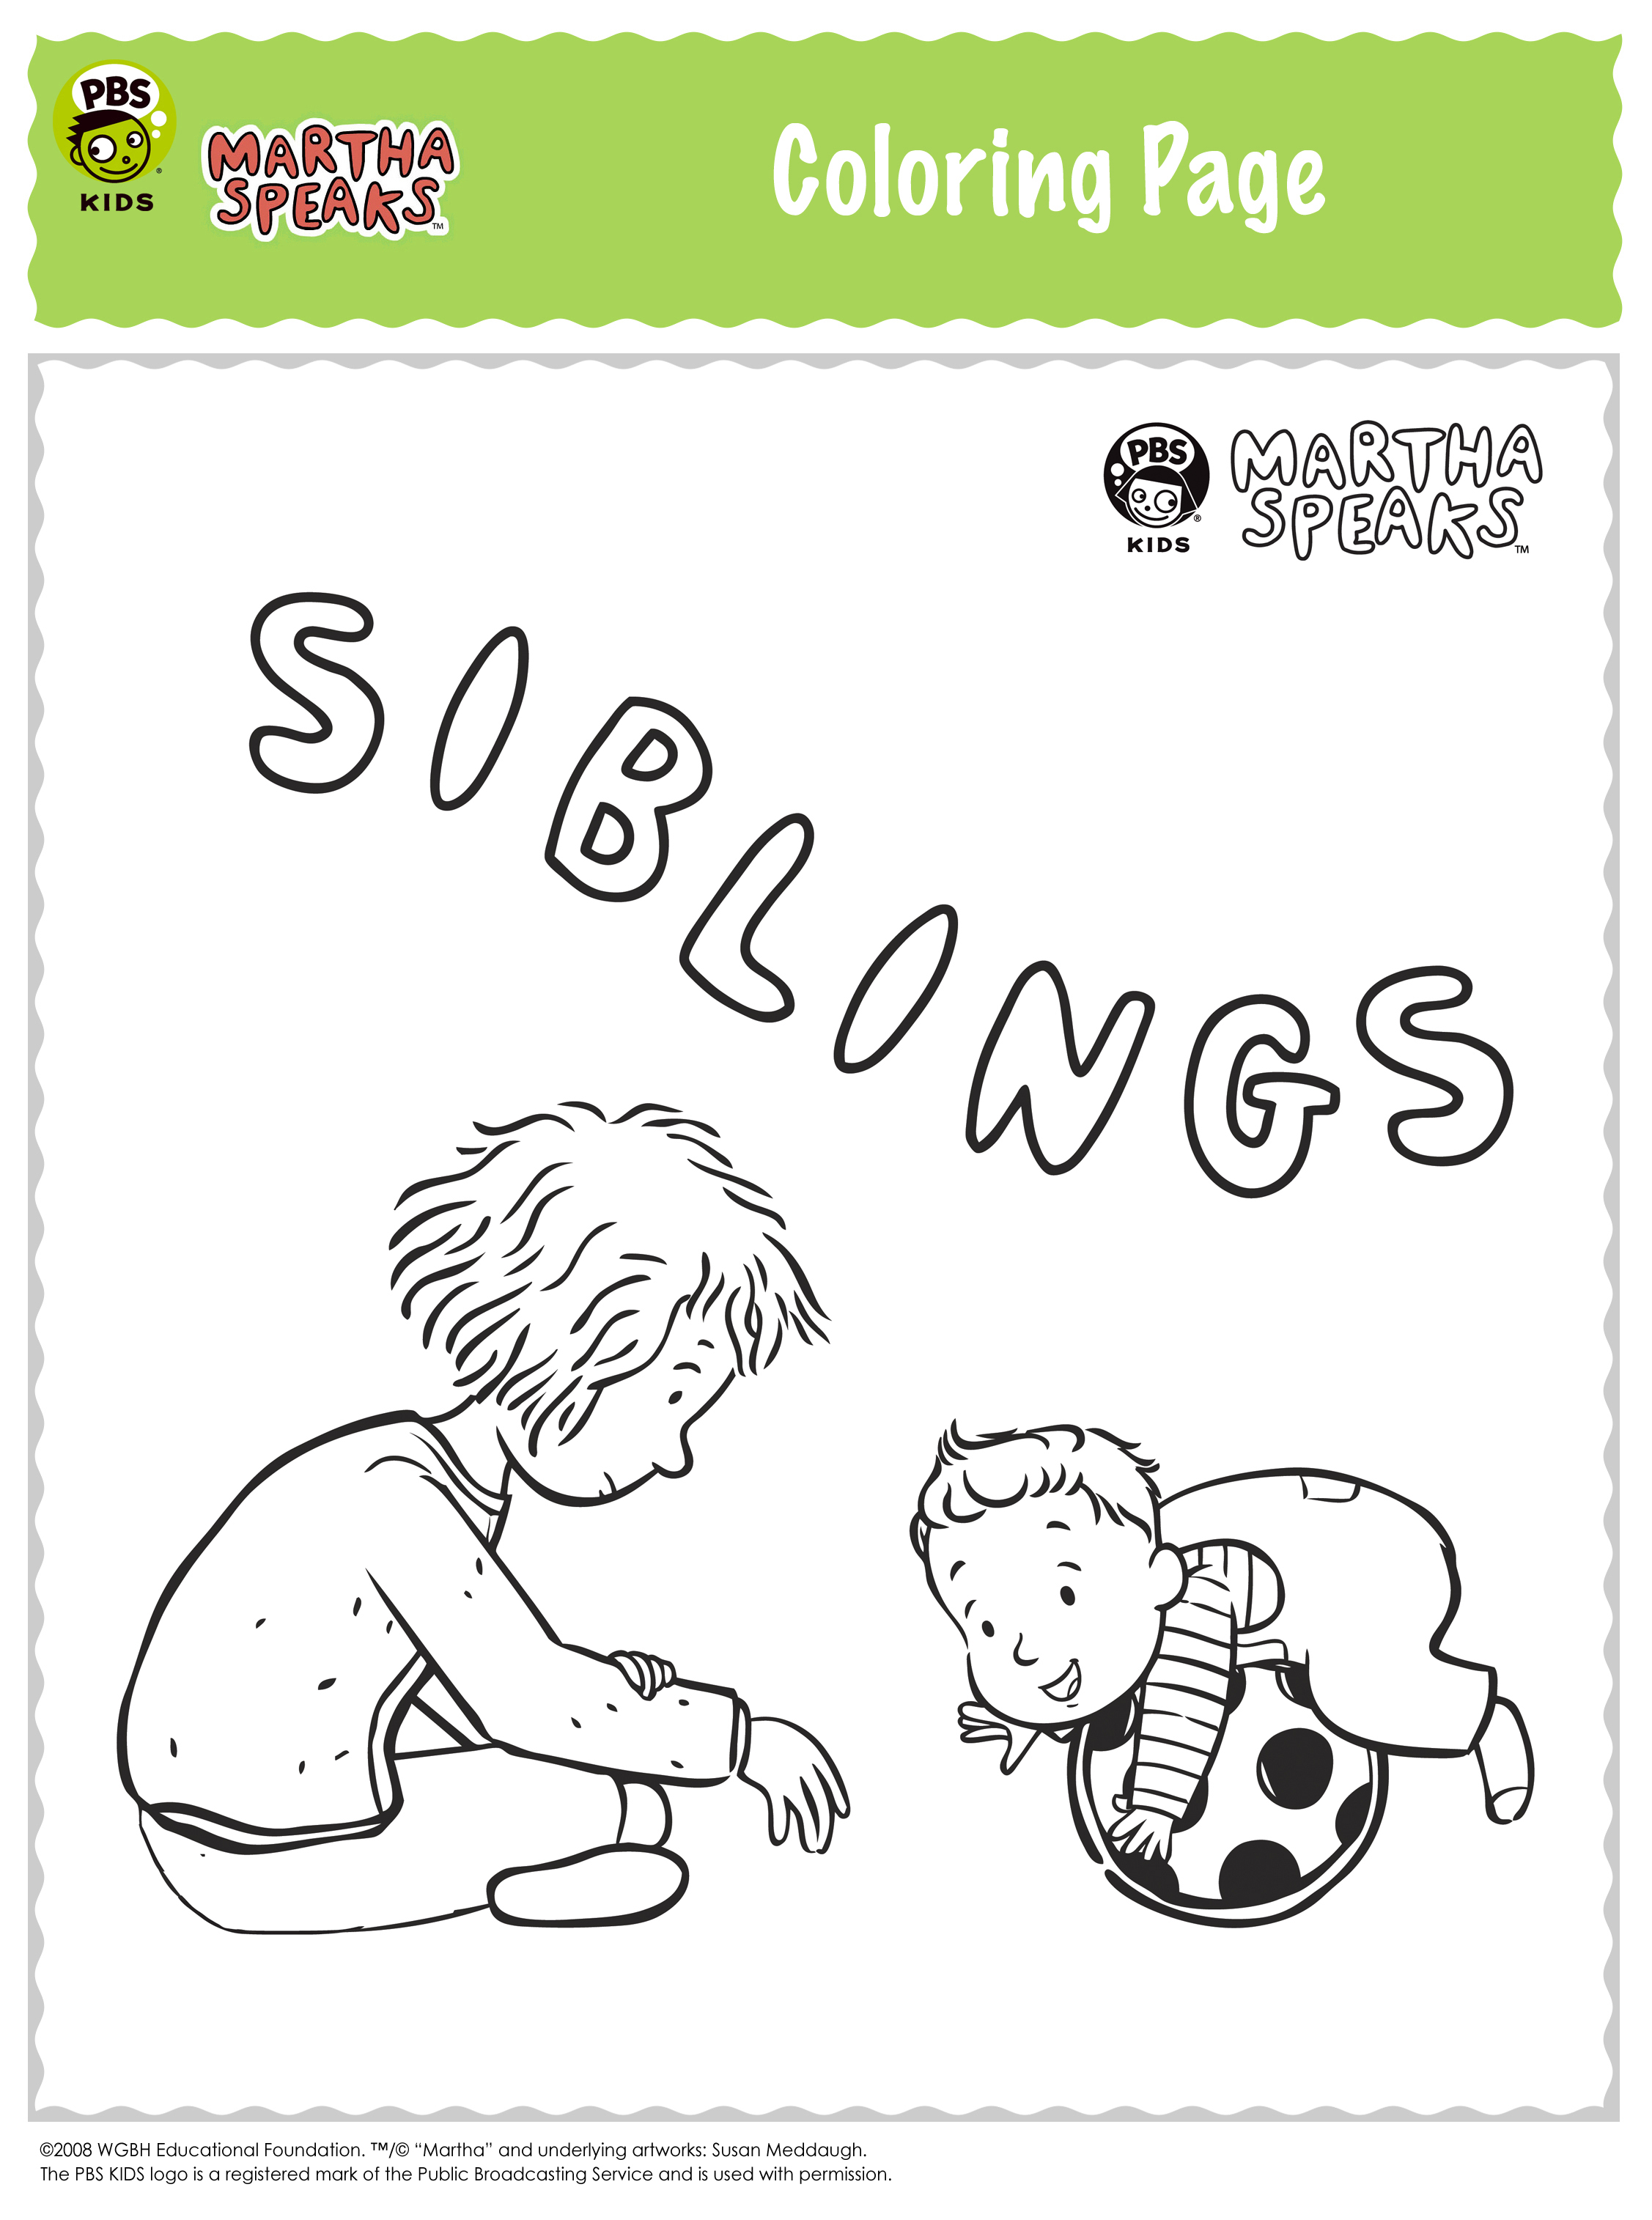 13 Best Martha Speaks Coloring Pages for Kids - Updated 2018